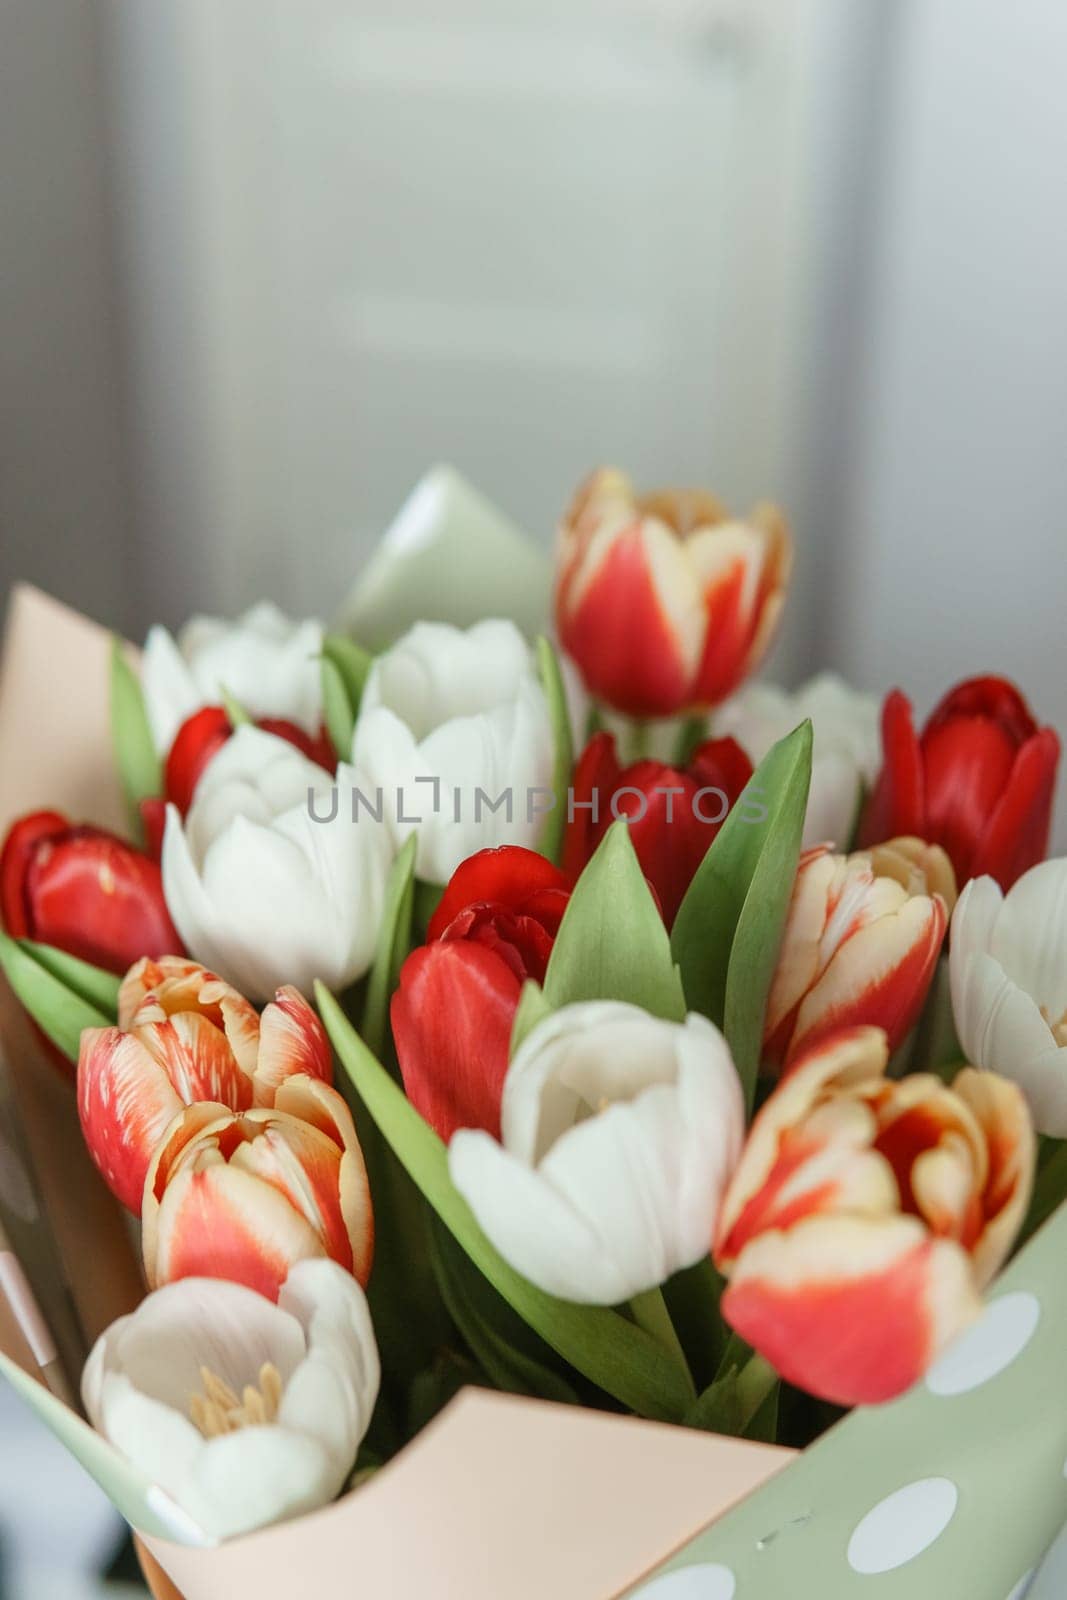 Celebration of Beauty: Tulips in Close-up as a Gift for March 8th by Annu1tochka